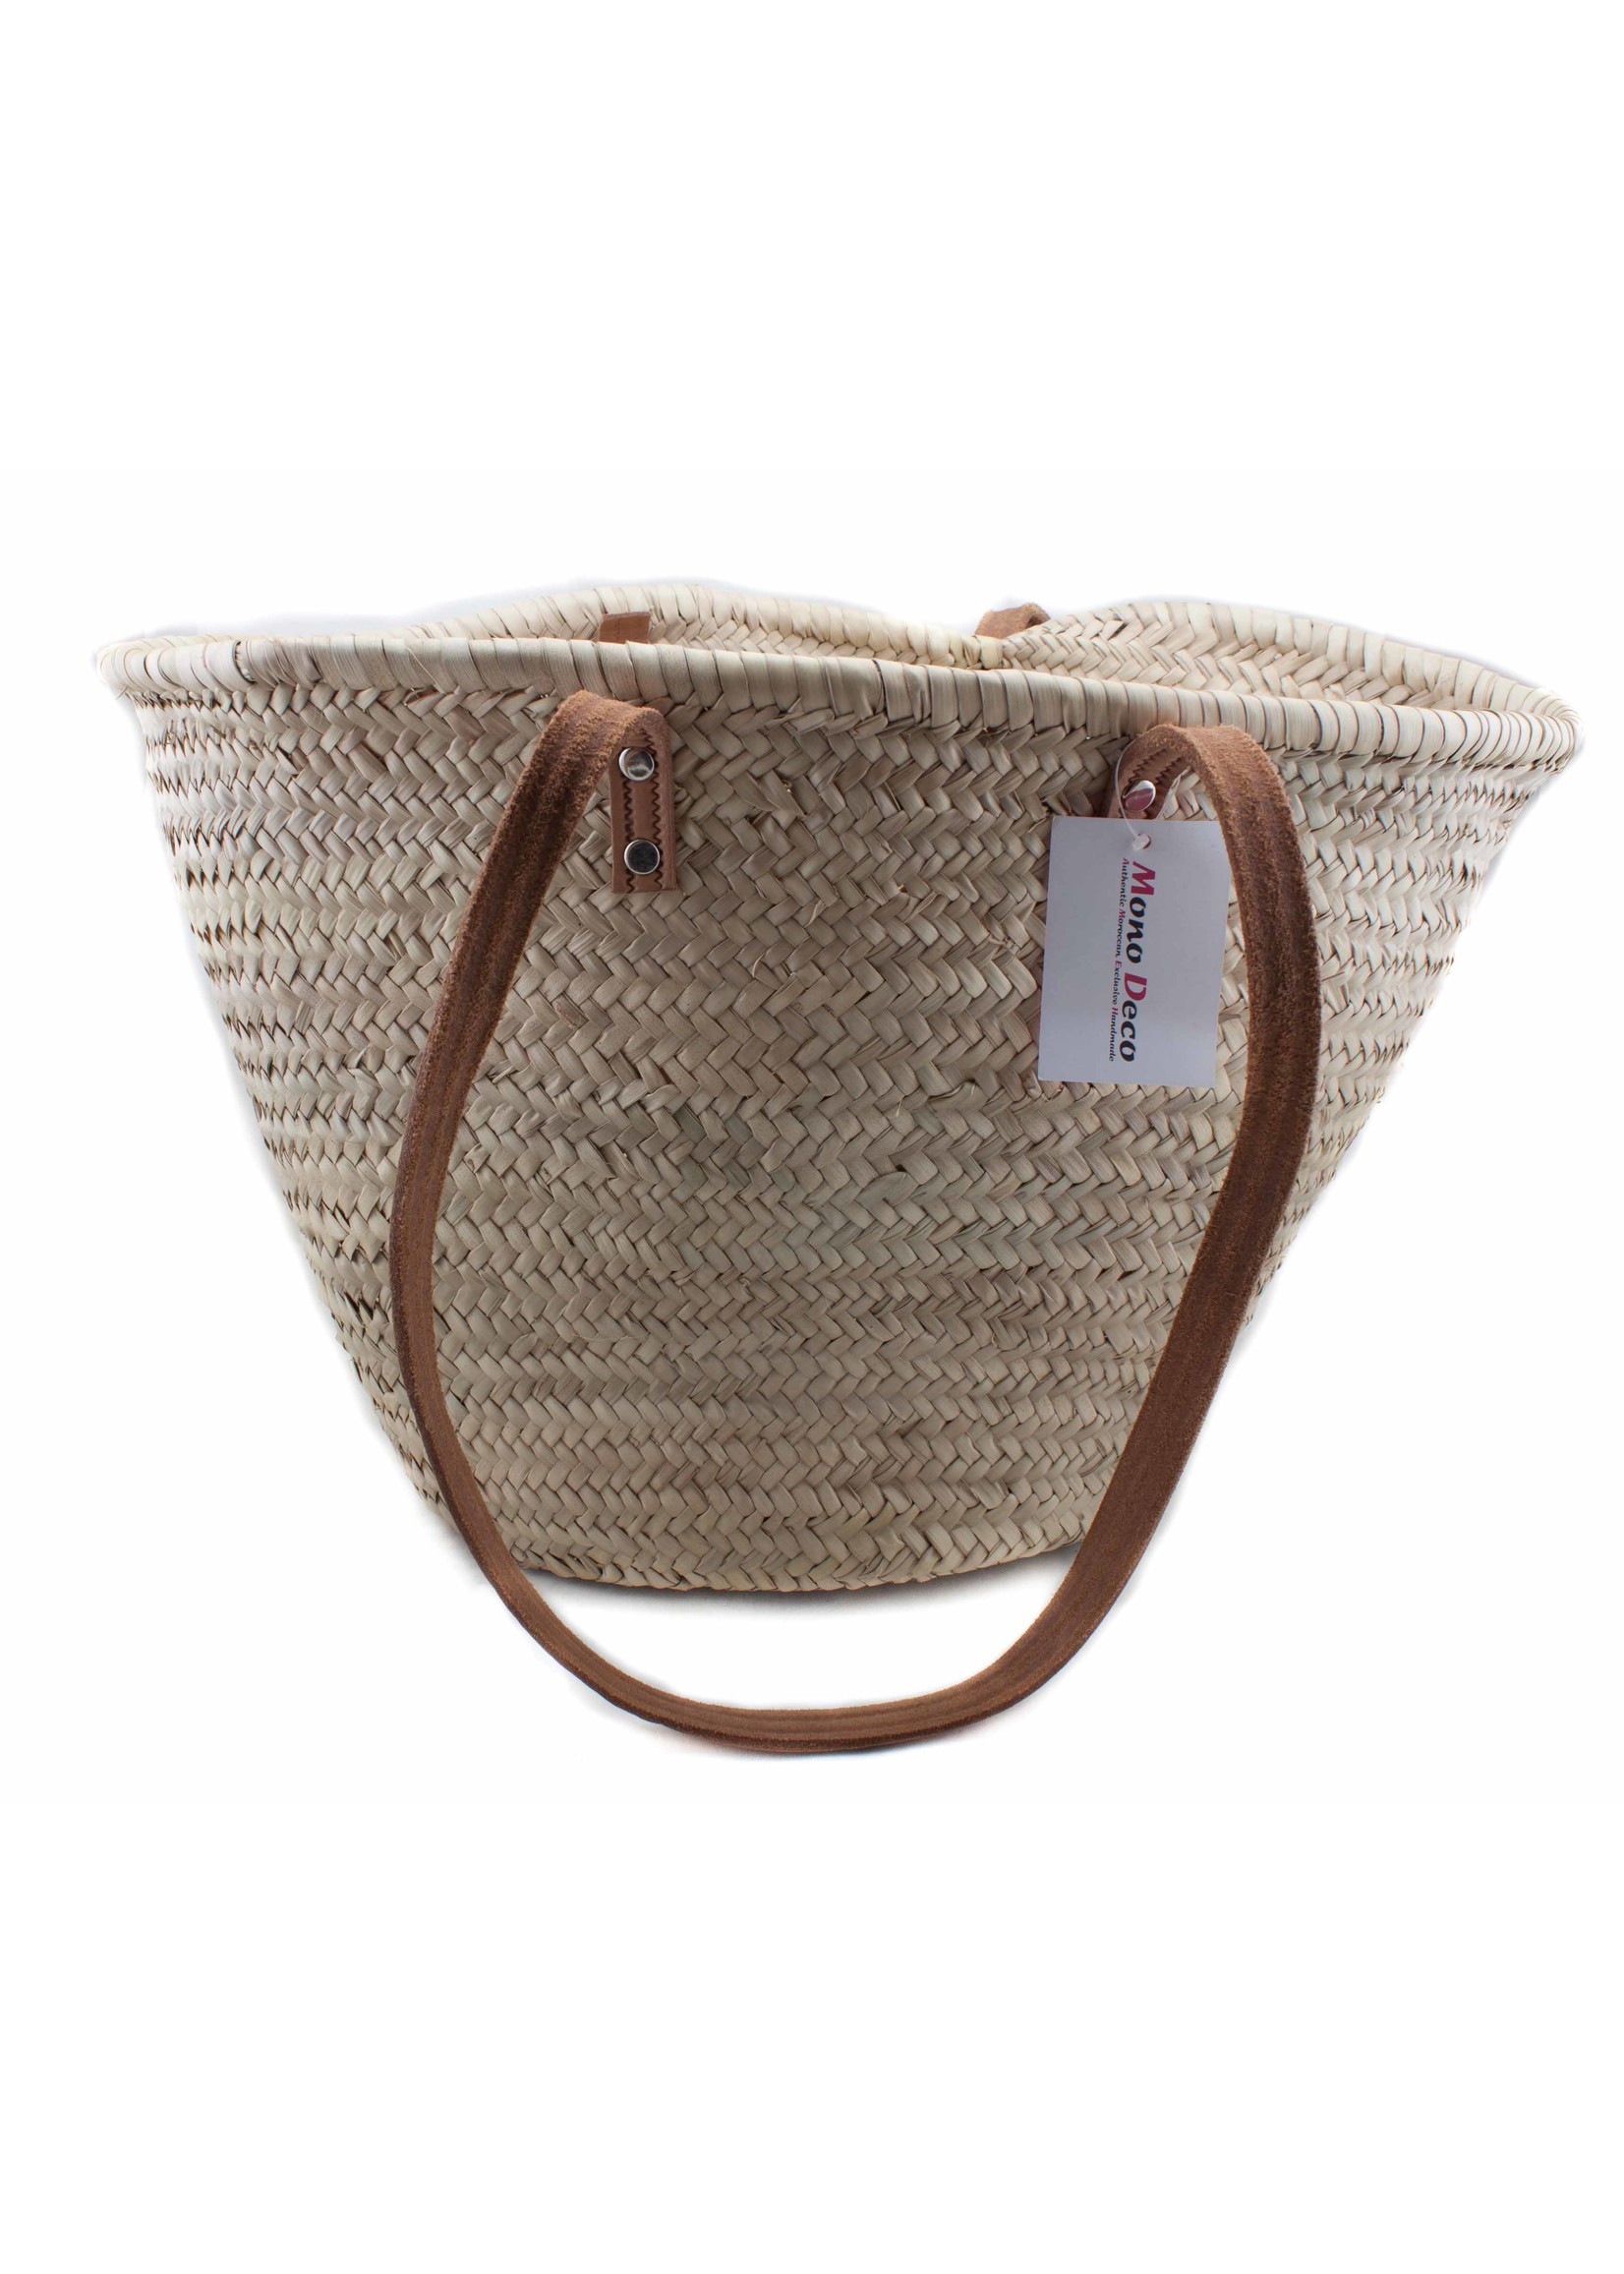 Mono Deco Straw bag with long leather straps